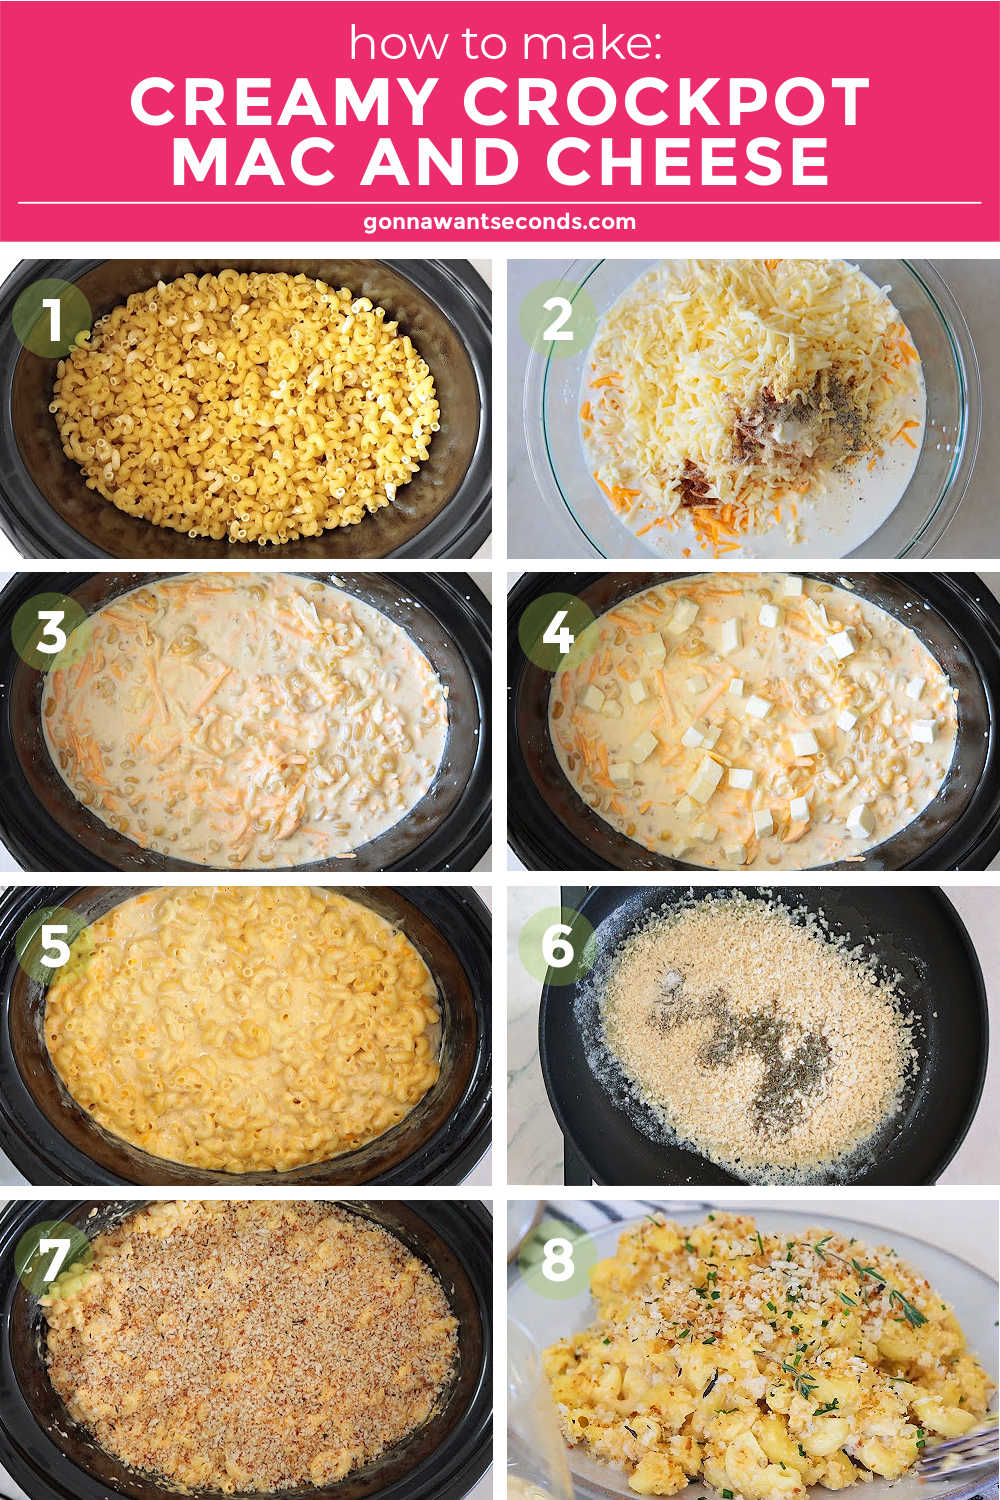 Step by step how to make creamy crockpot mac and cheese